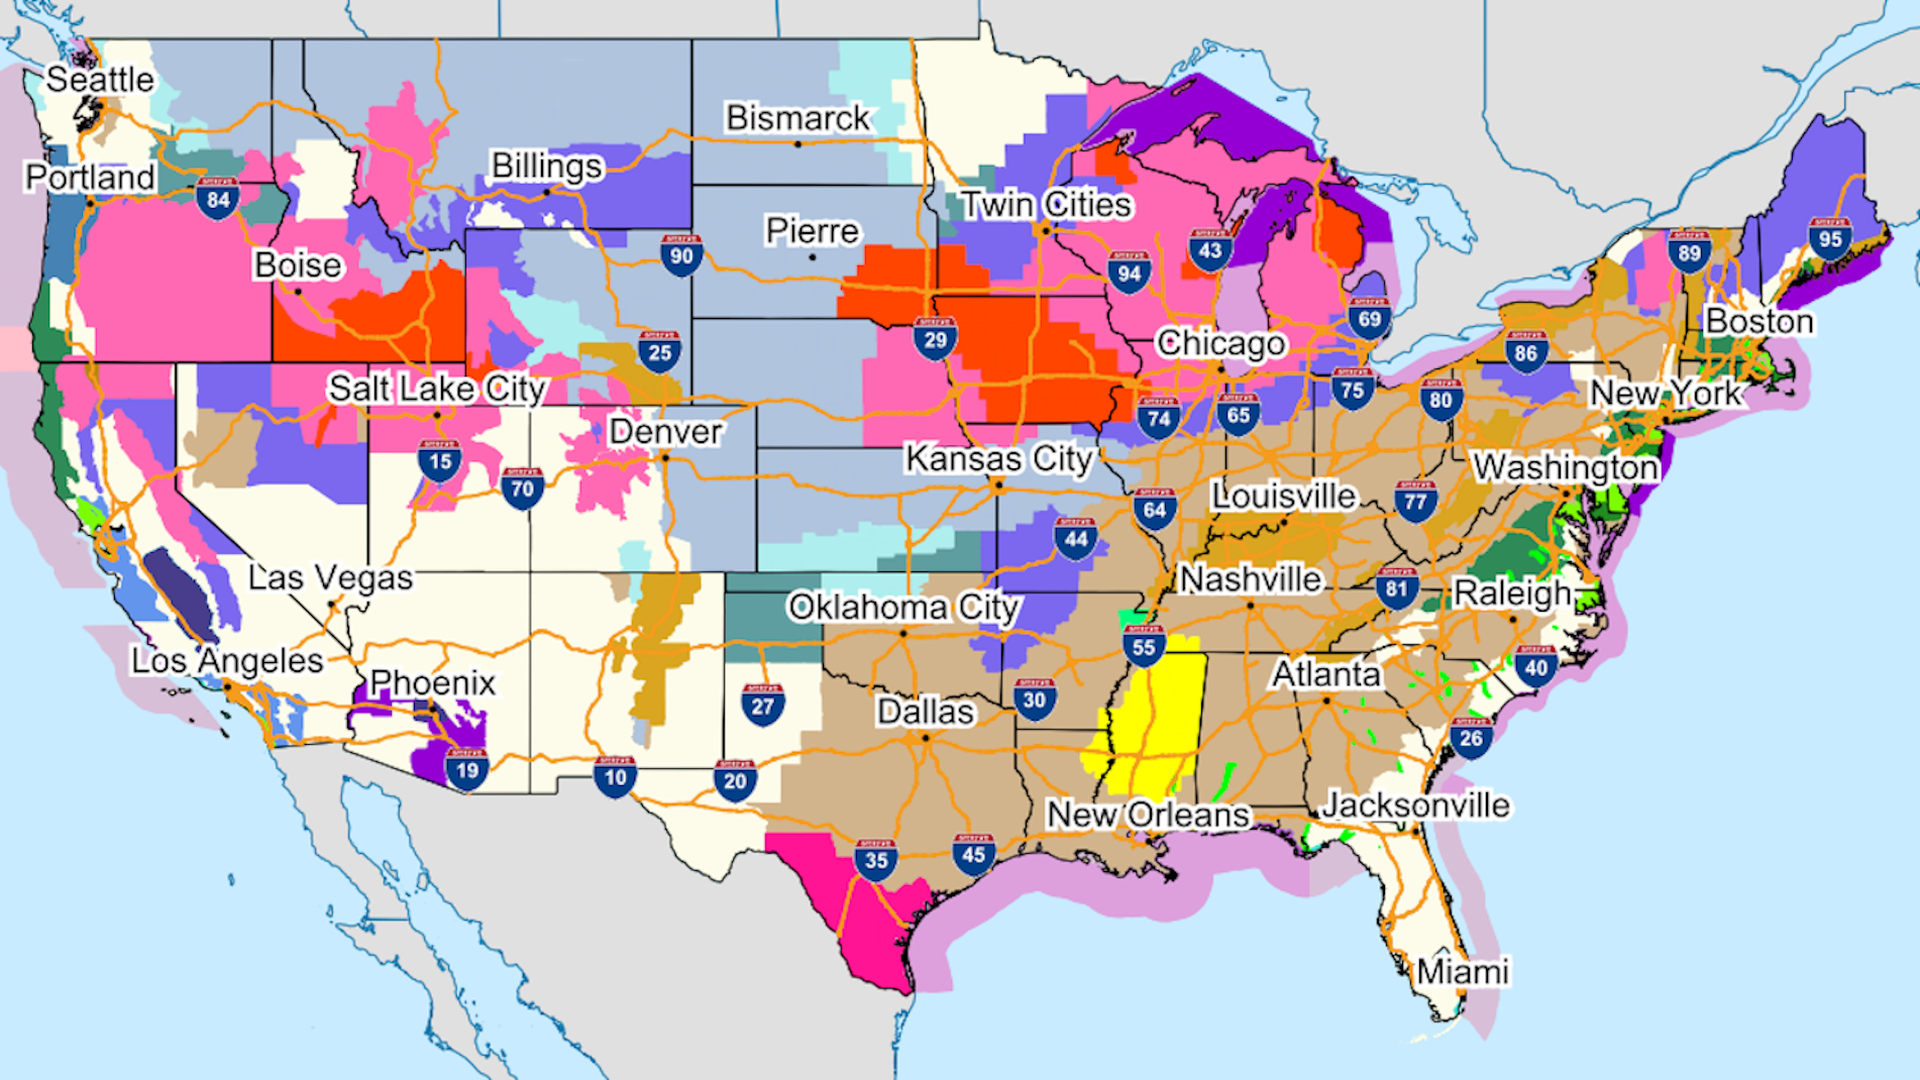 Watches, warnings and advisories across the U.S. on Friday morning.